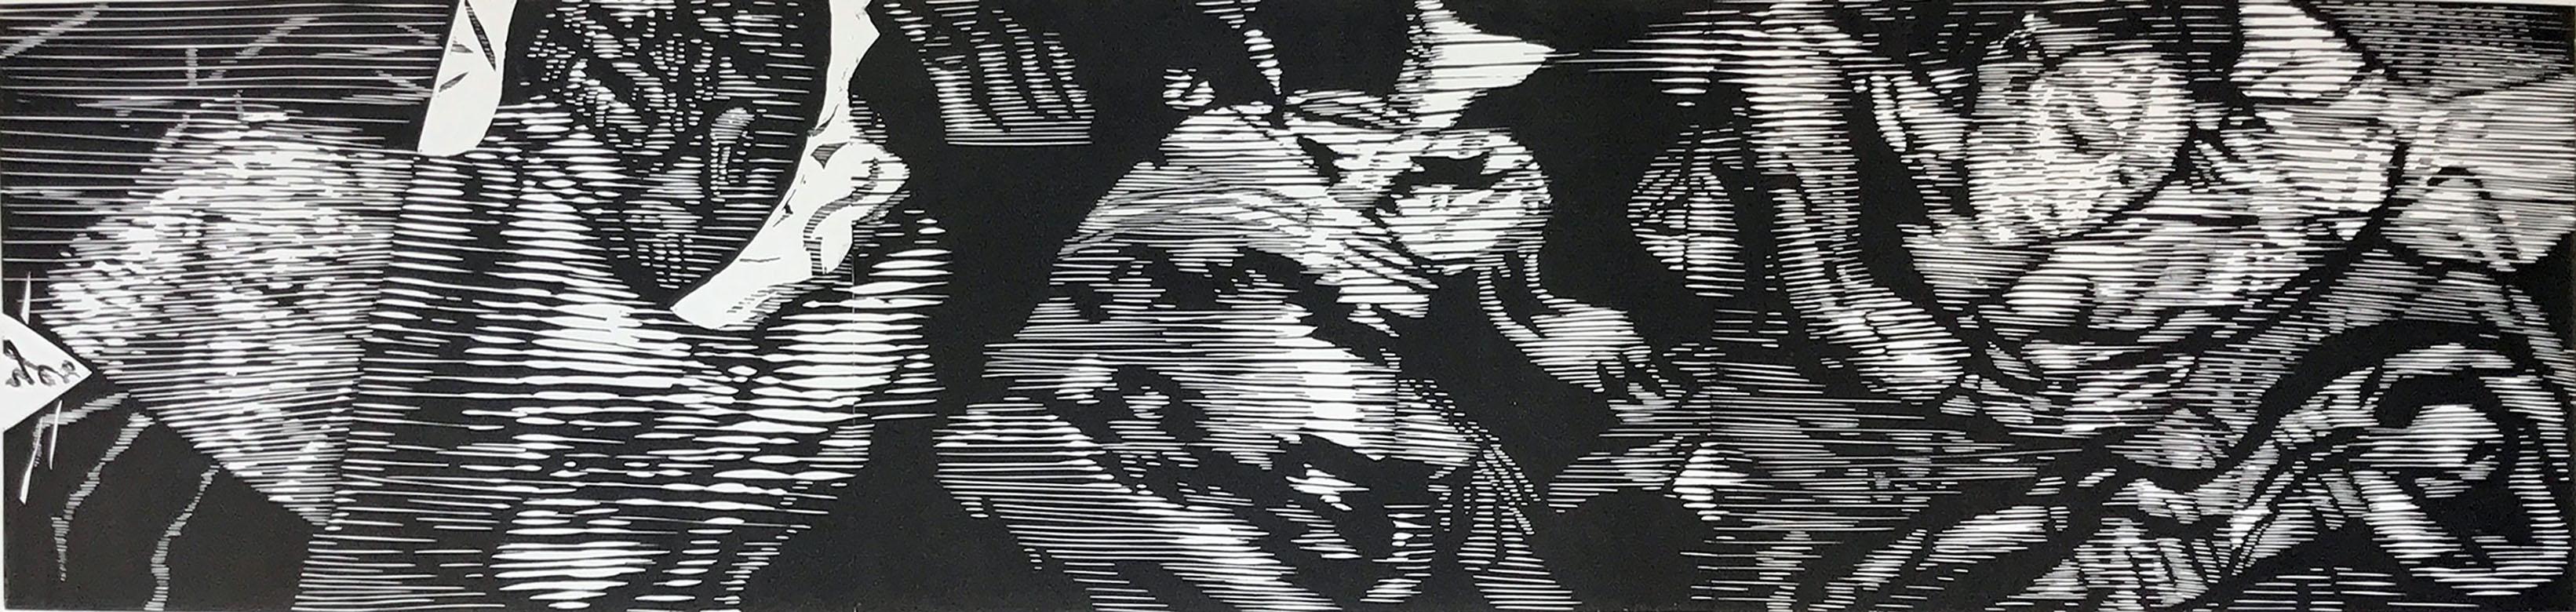 This is from a series of linocuts made with a single horizontal line. The resulting mesh of black and white creates a shimmering effect that both defines and blurs the image. Objects appear and disappear from view. Signed artist proof from the